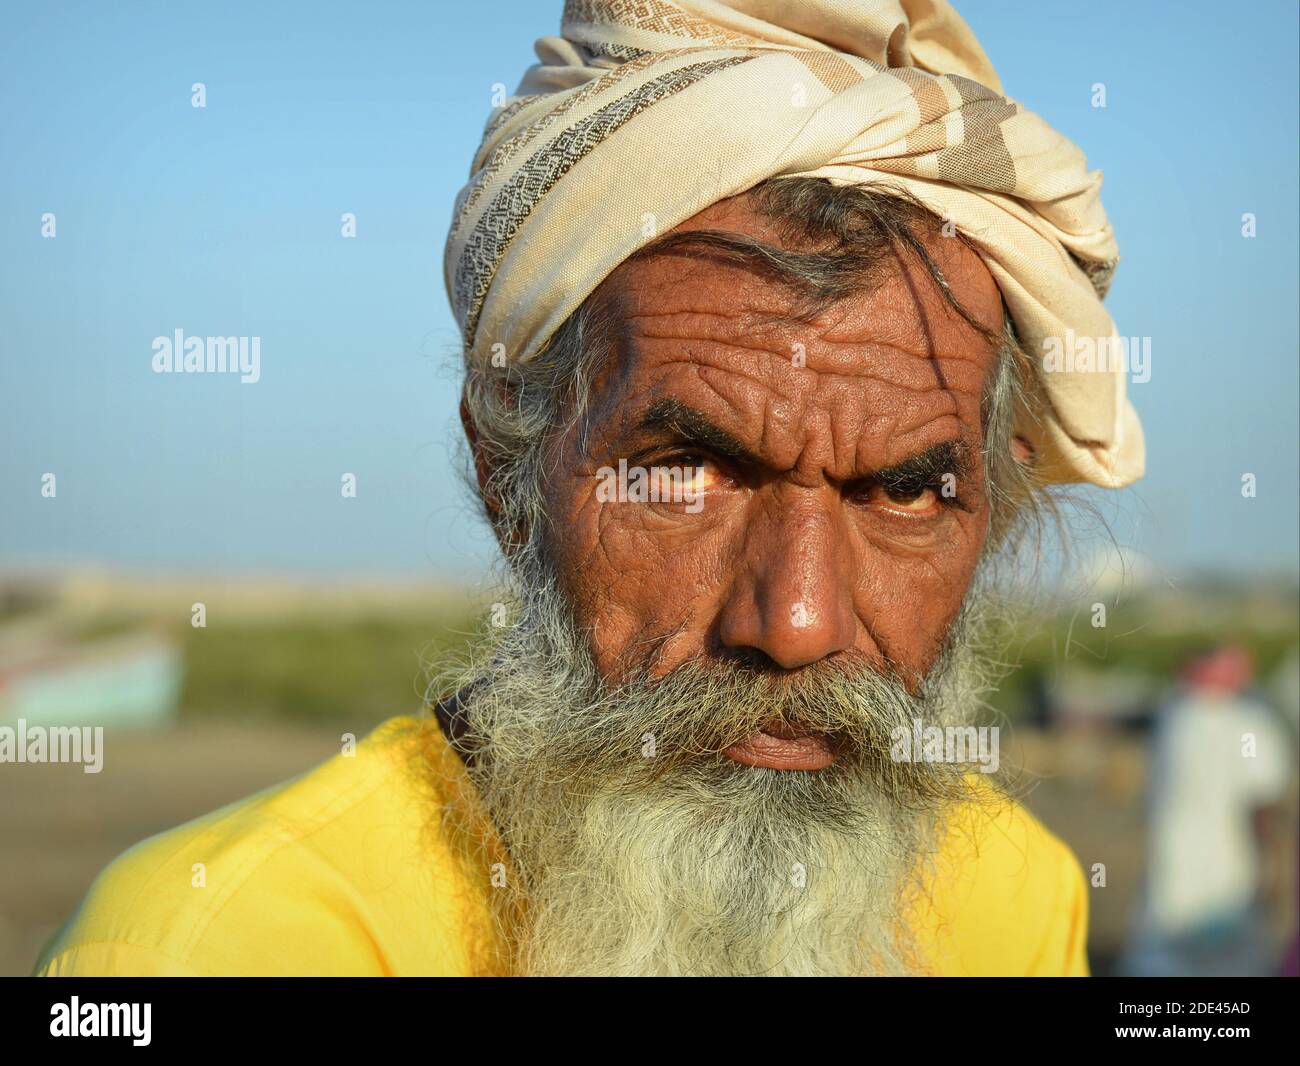 Stern-looking bearded turbaned old Indian man with lived-in face and deep wrinkles on his forehead stares at the camera. Stock Photo